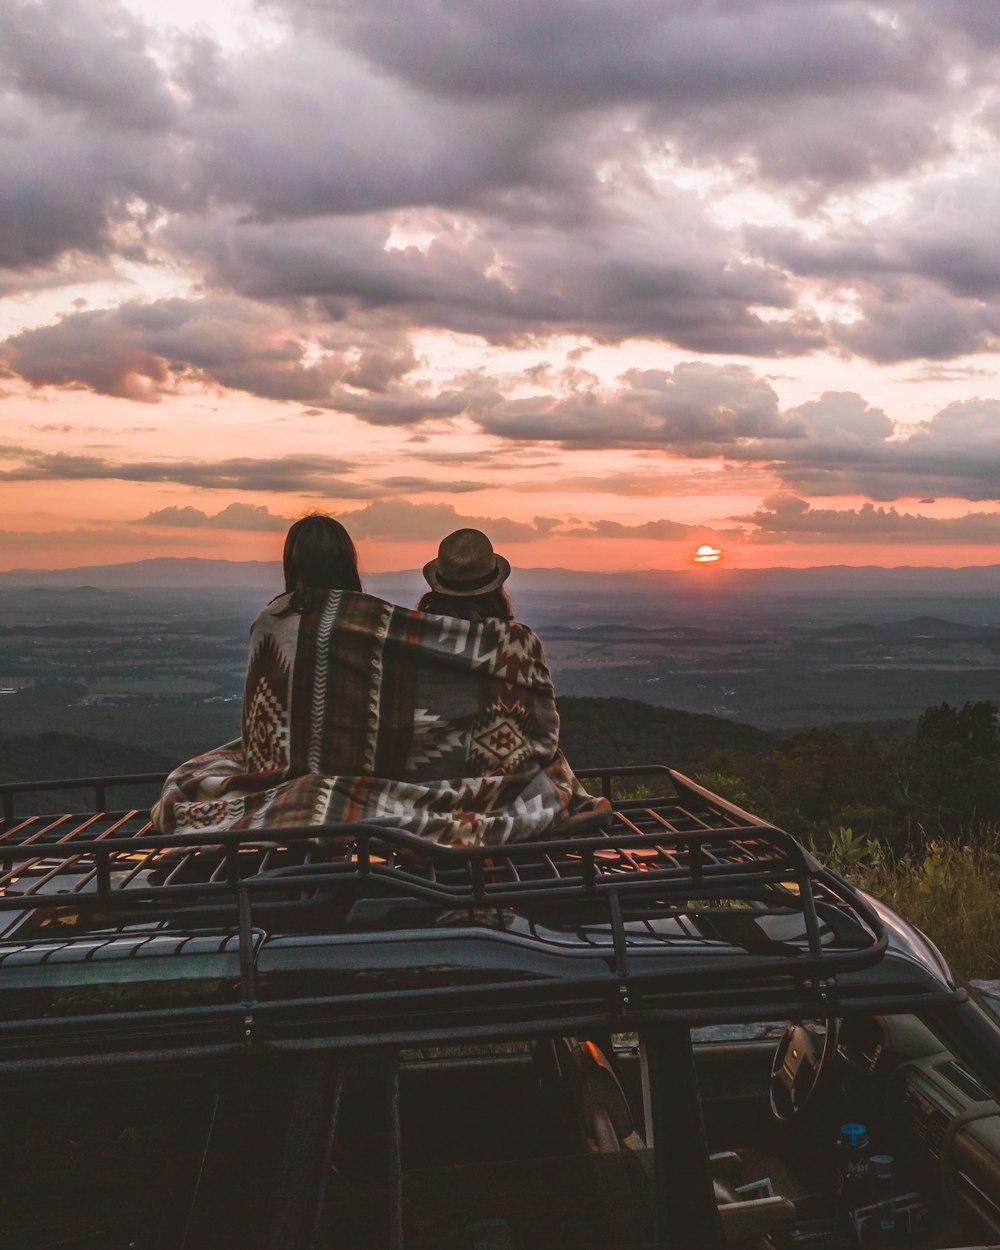 two people sitting on vehicle roof during golden hour